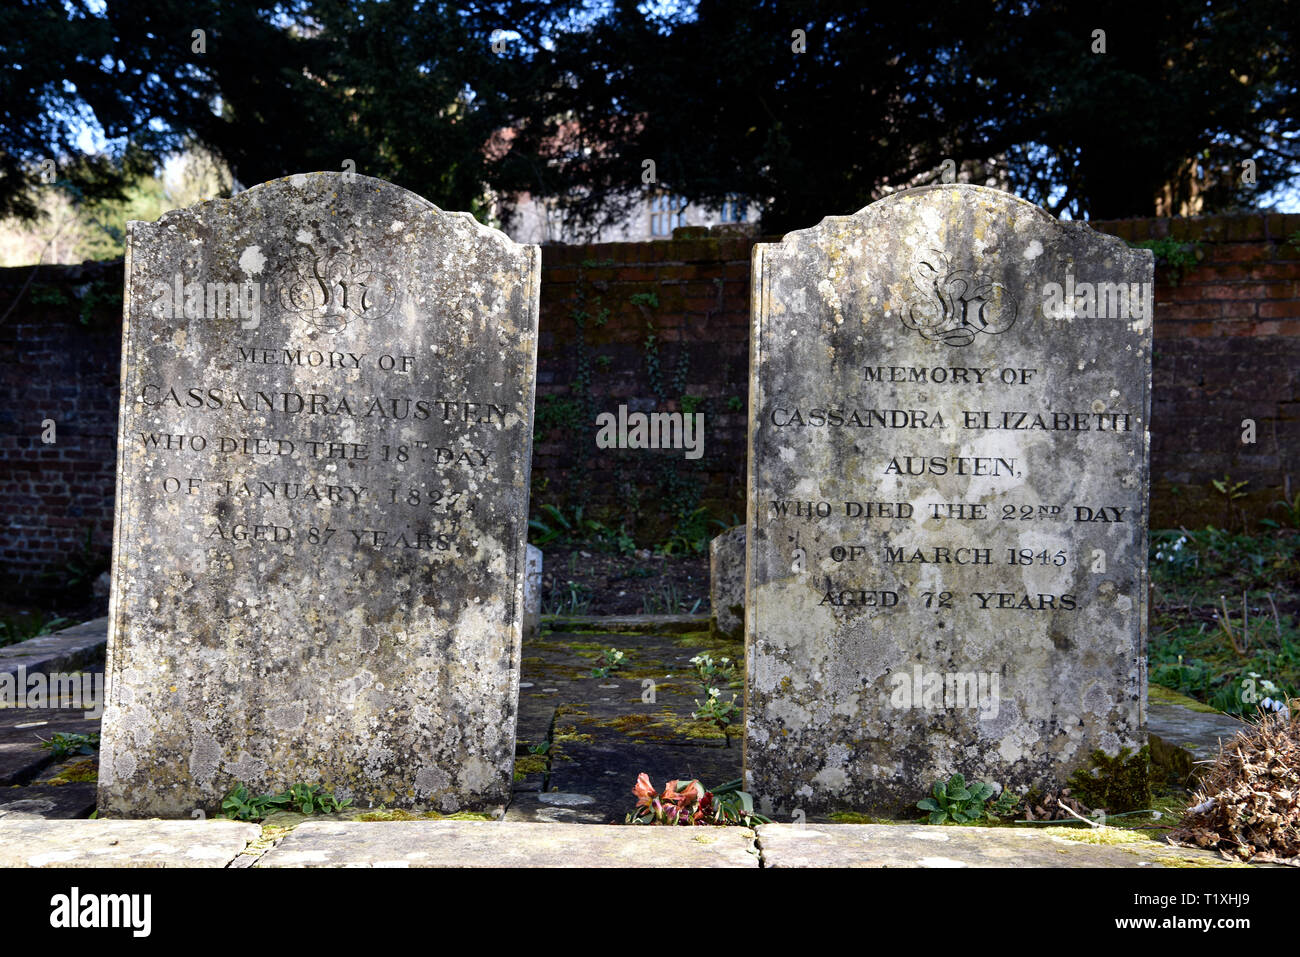 The weathered headstones of Jane Austen’s mother & sister buried in the grounds of Saint Nicholas Church, Chawton, near Alton, Hampshire, UK. Stock Photo